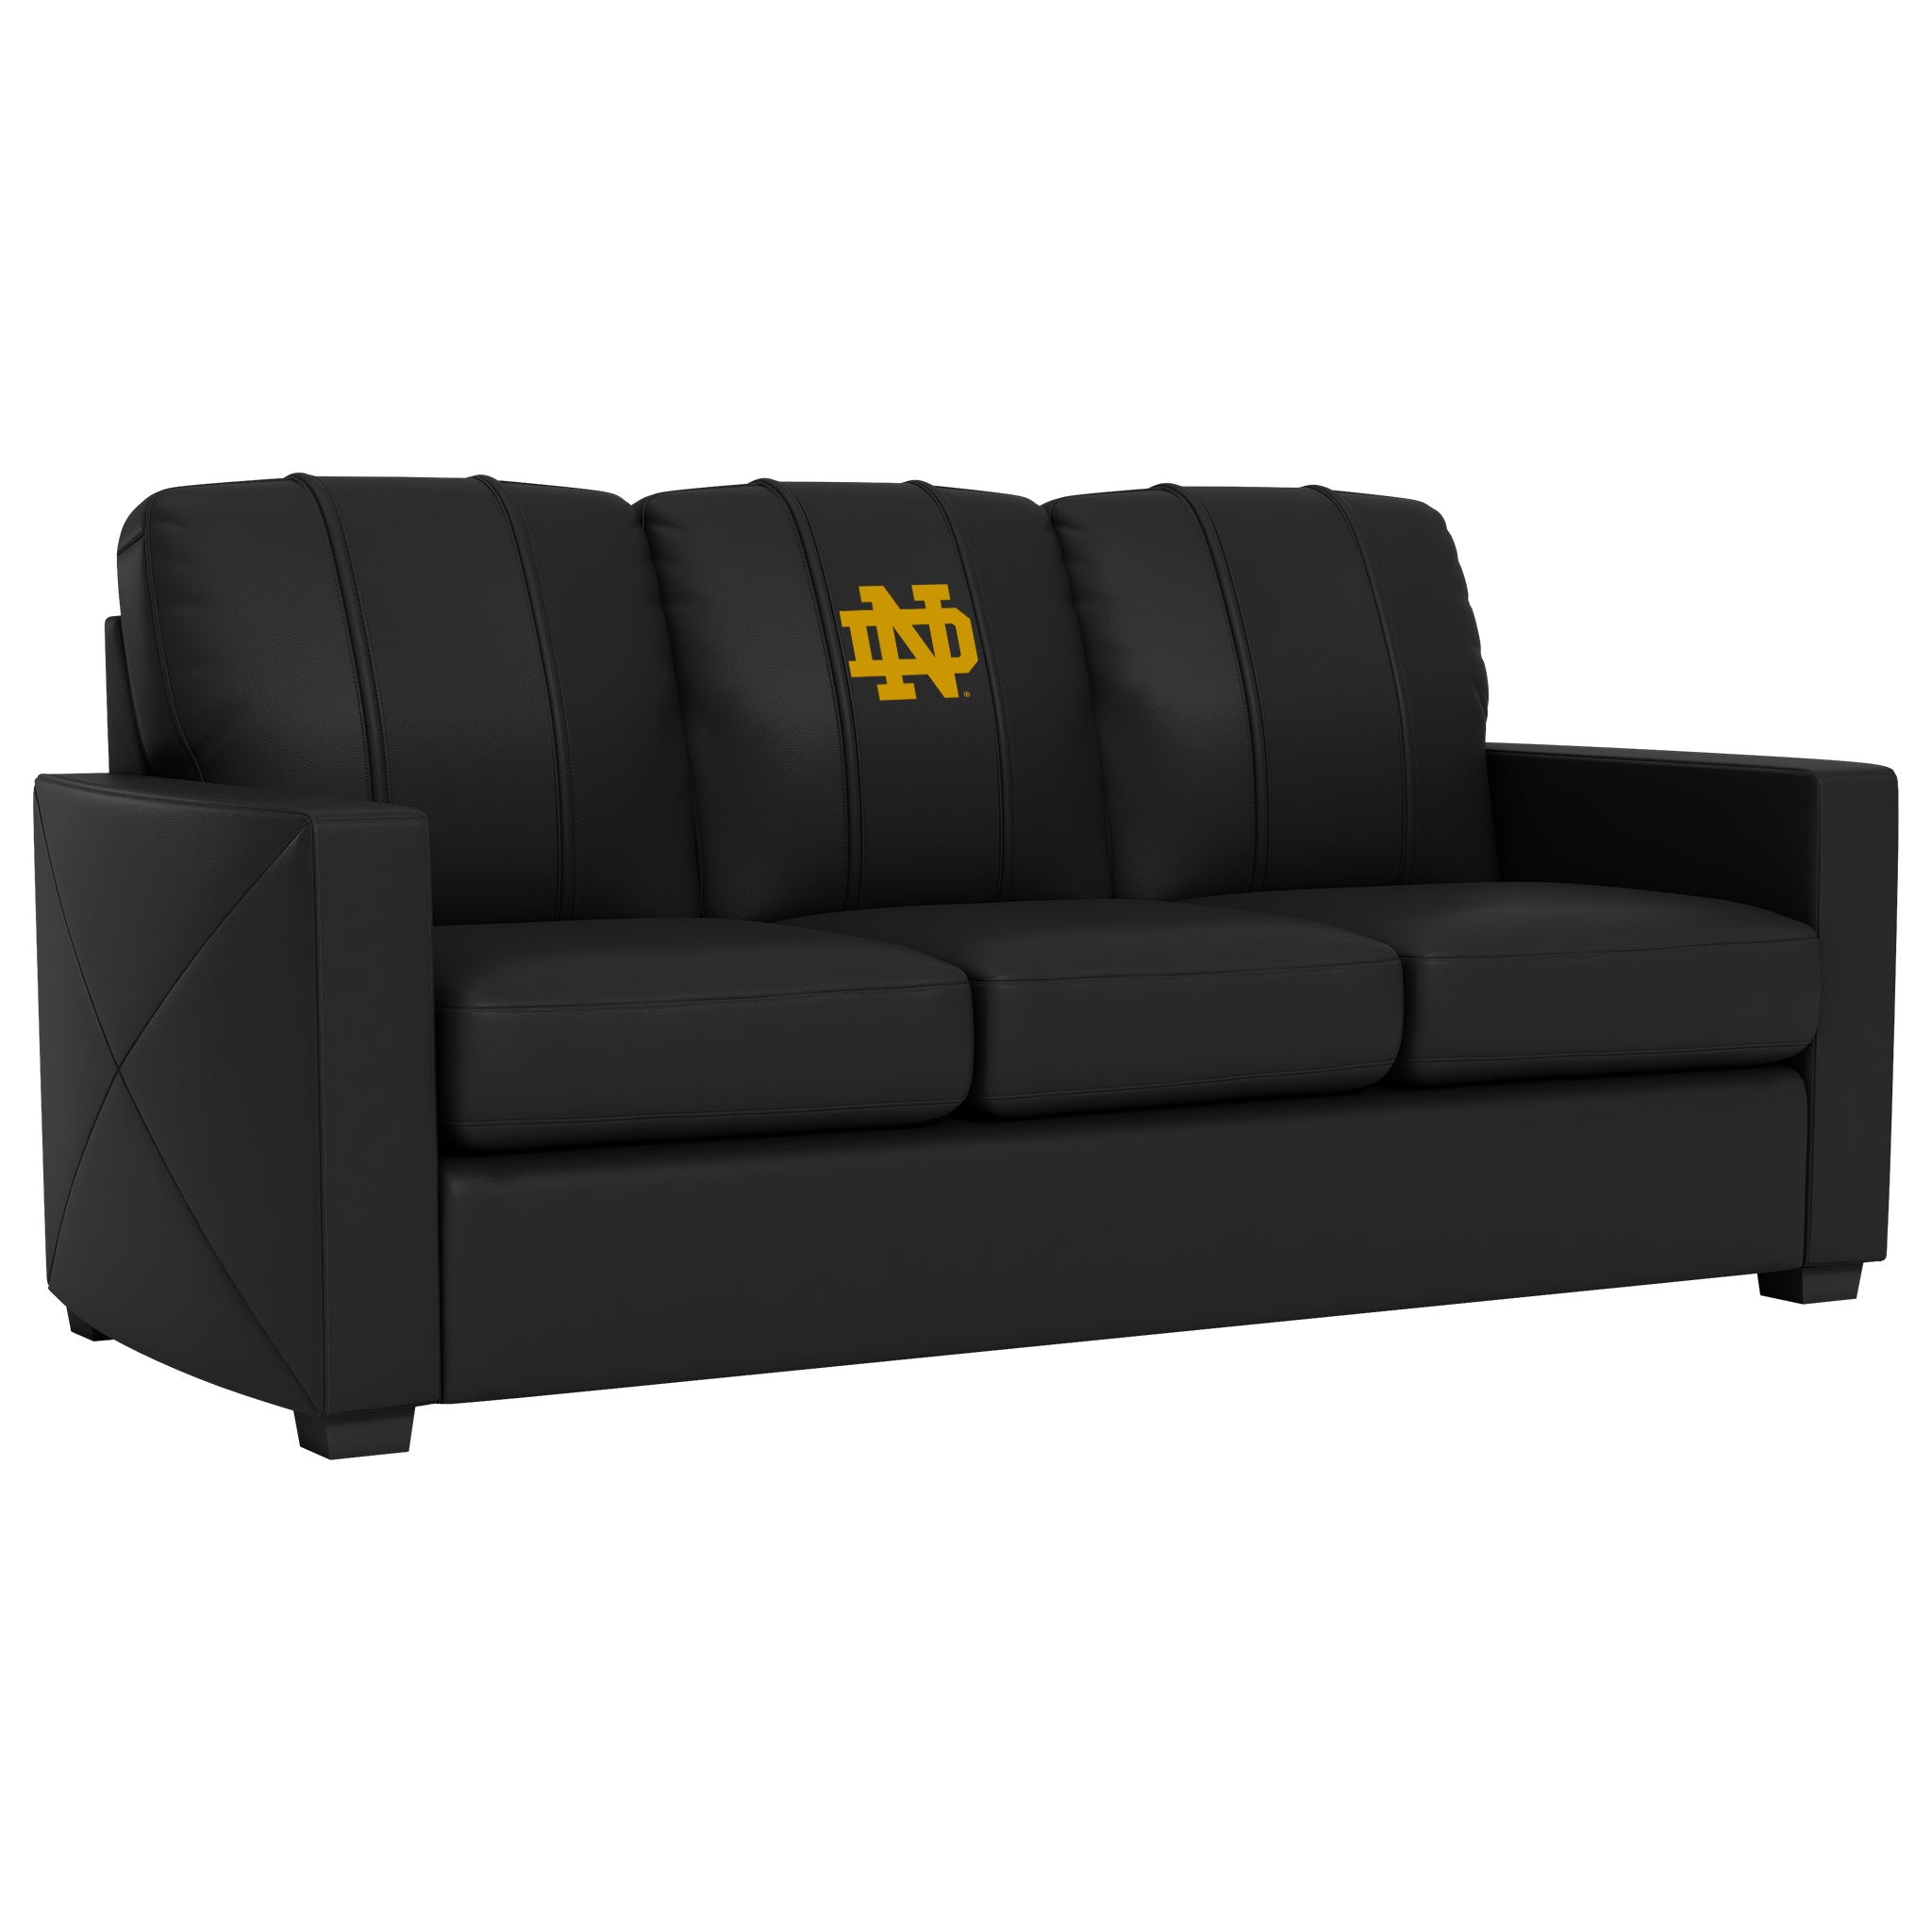 Notre Dame Silver Sofa with Notre Dame Primary Logo